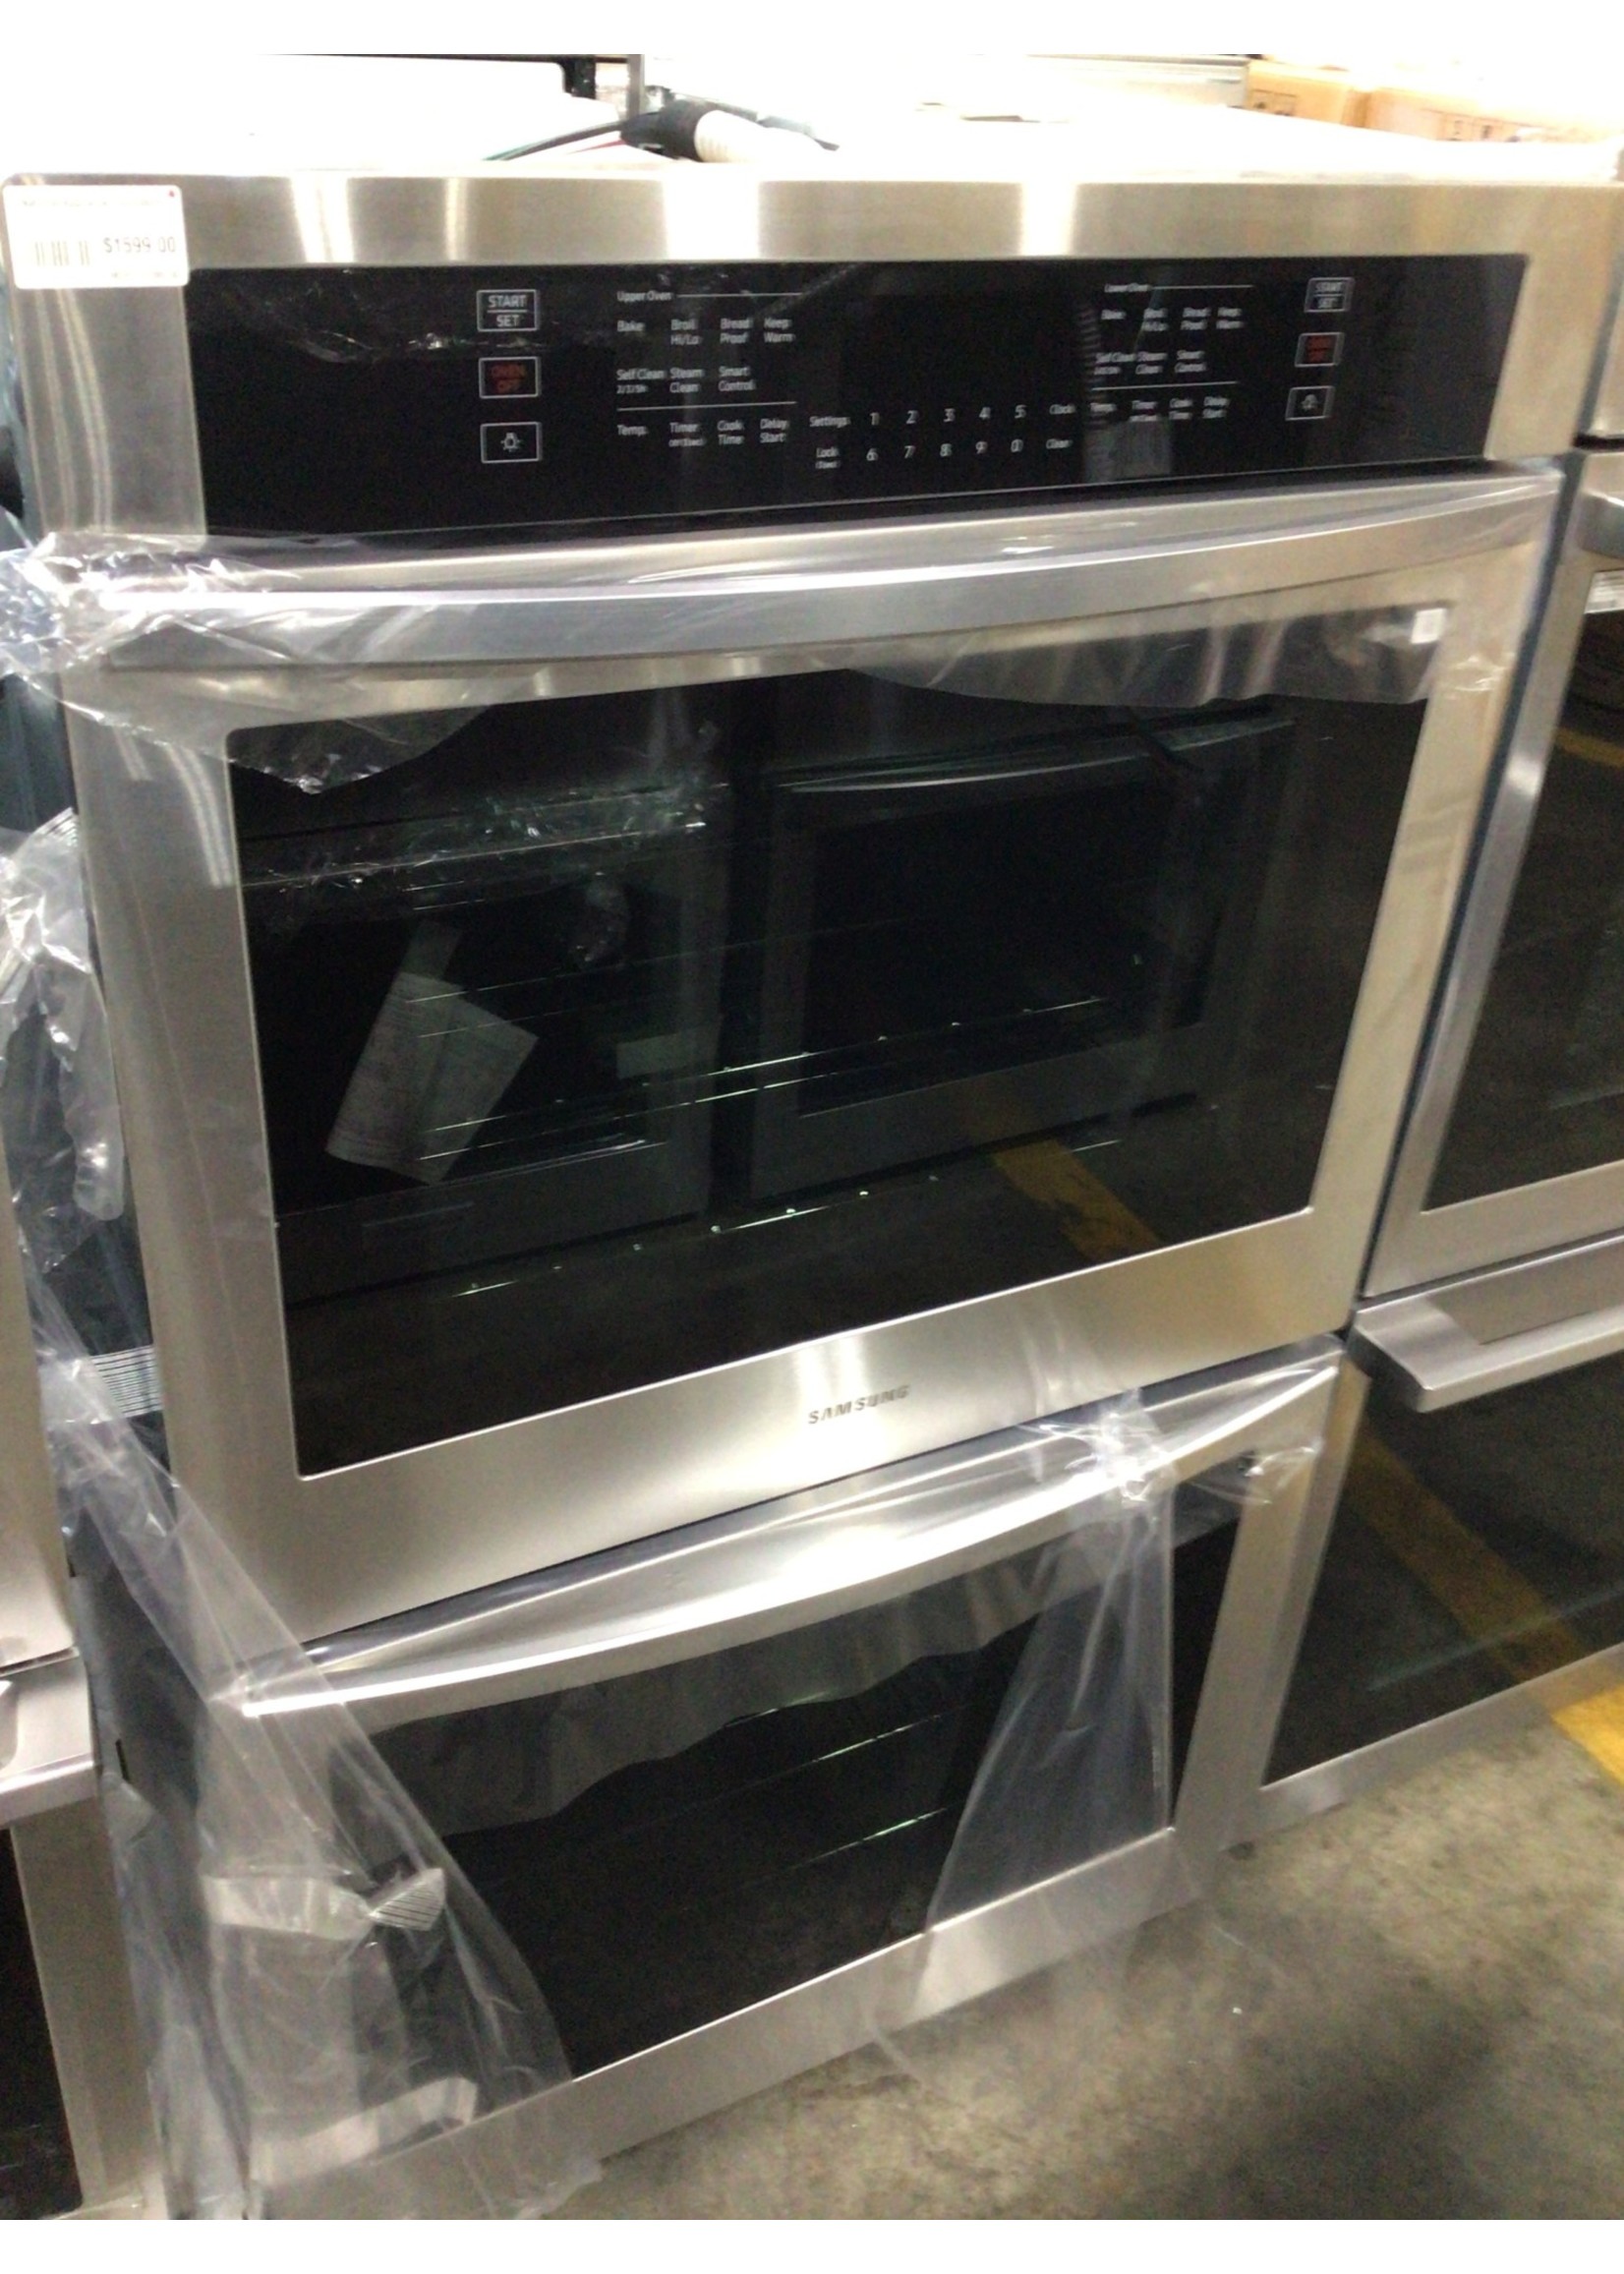 Samsung Samsung NV51T5511DS 30" Built-In Double Wall Oven with WiFi - Stainless steel